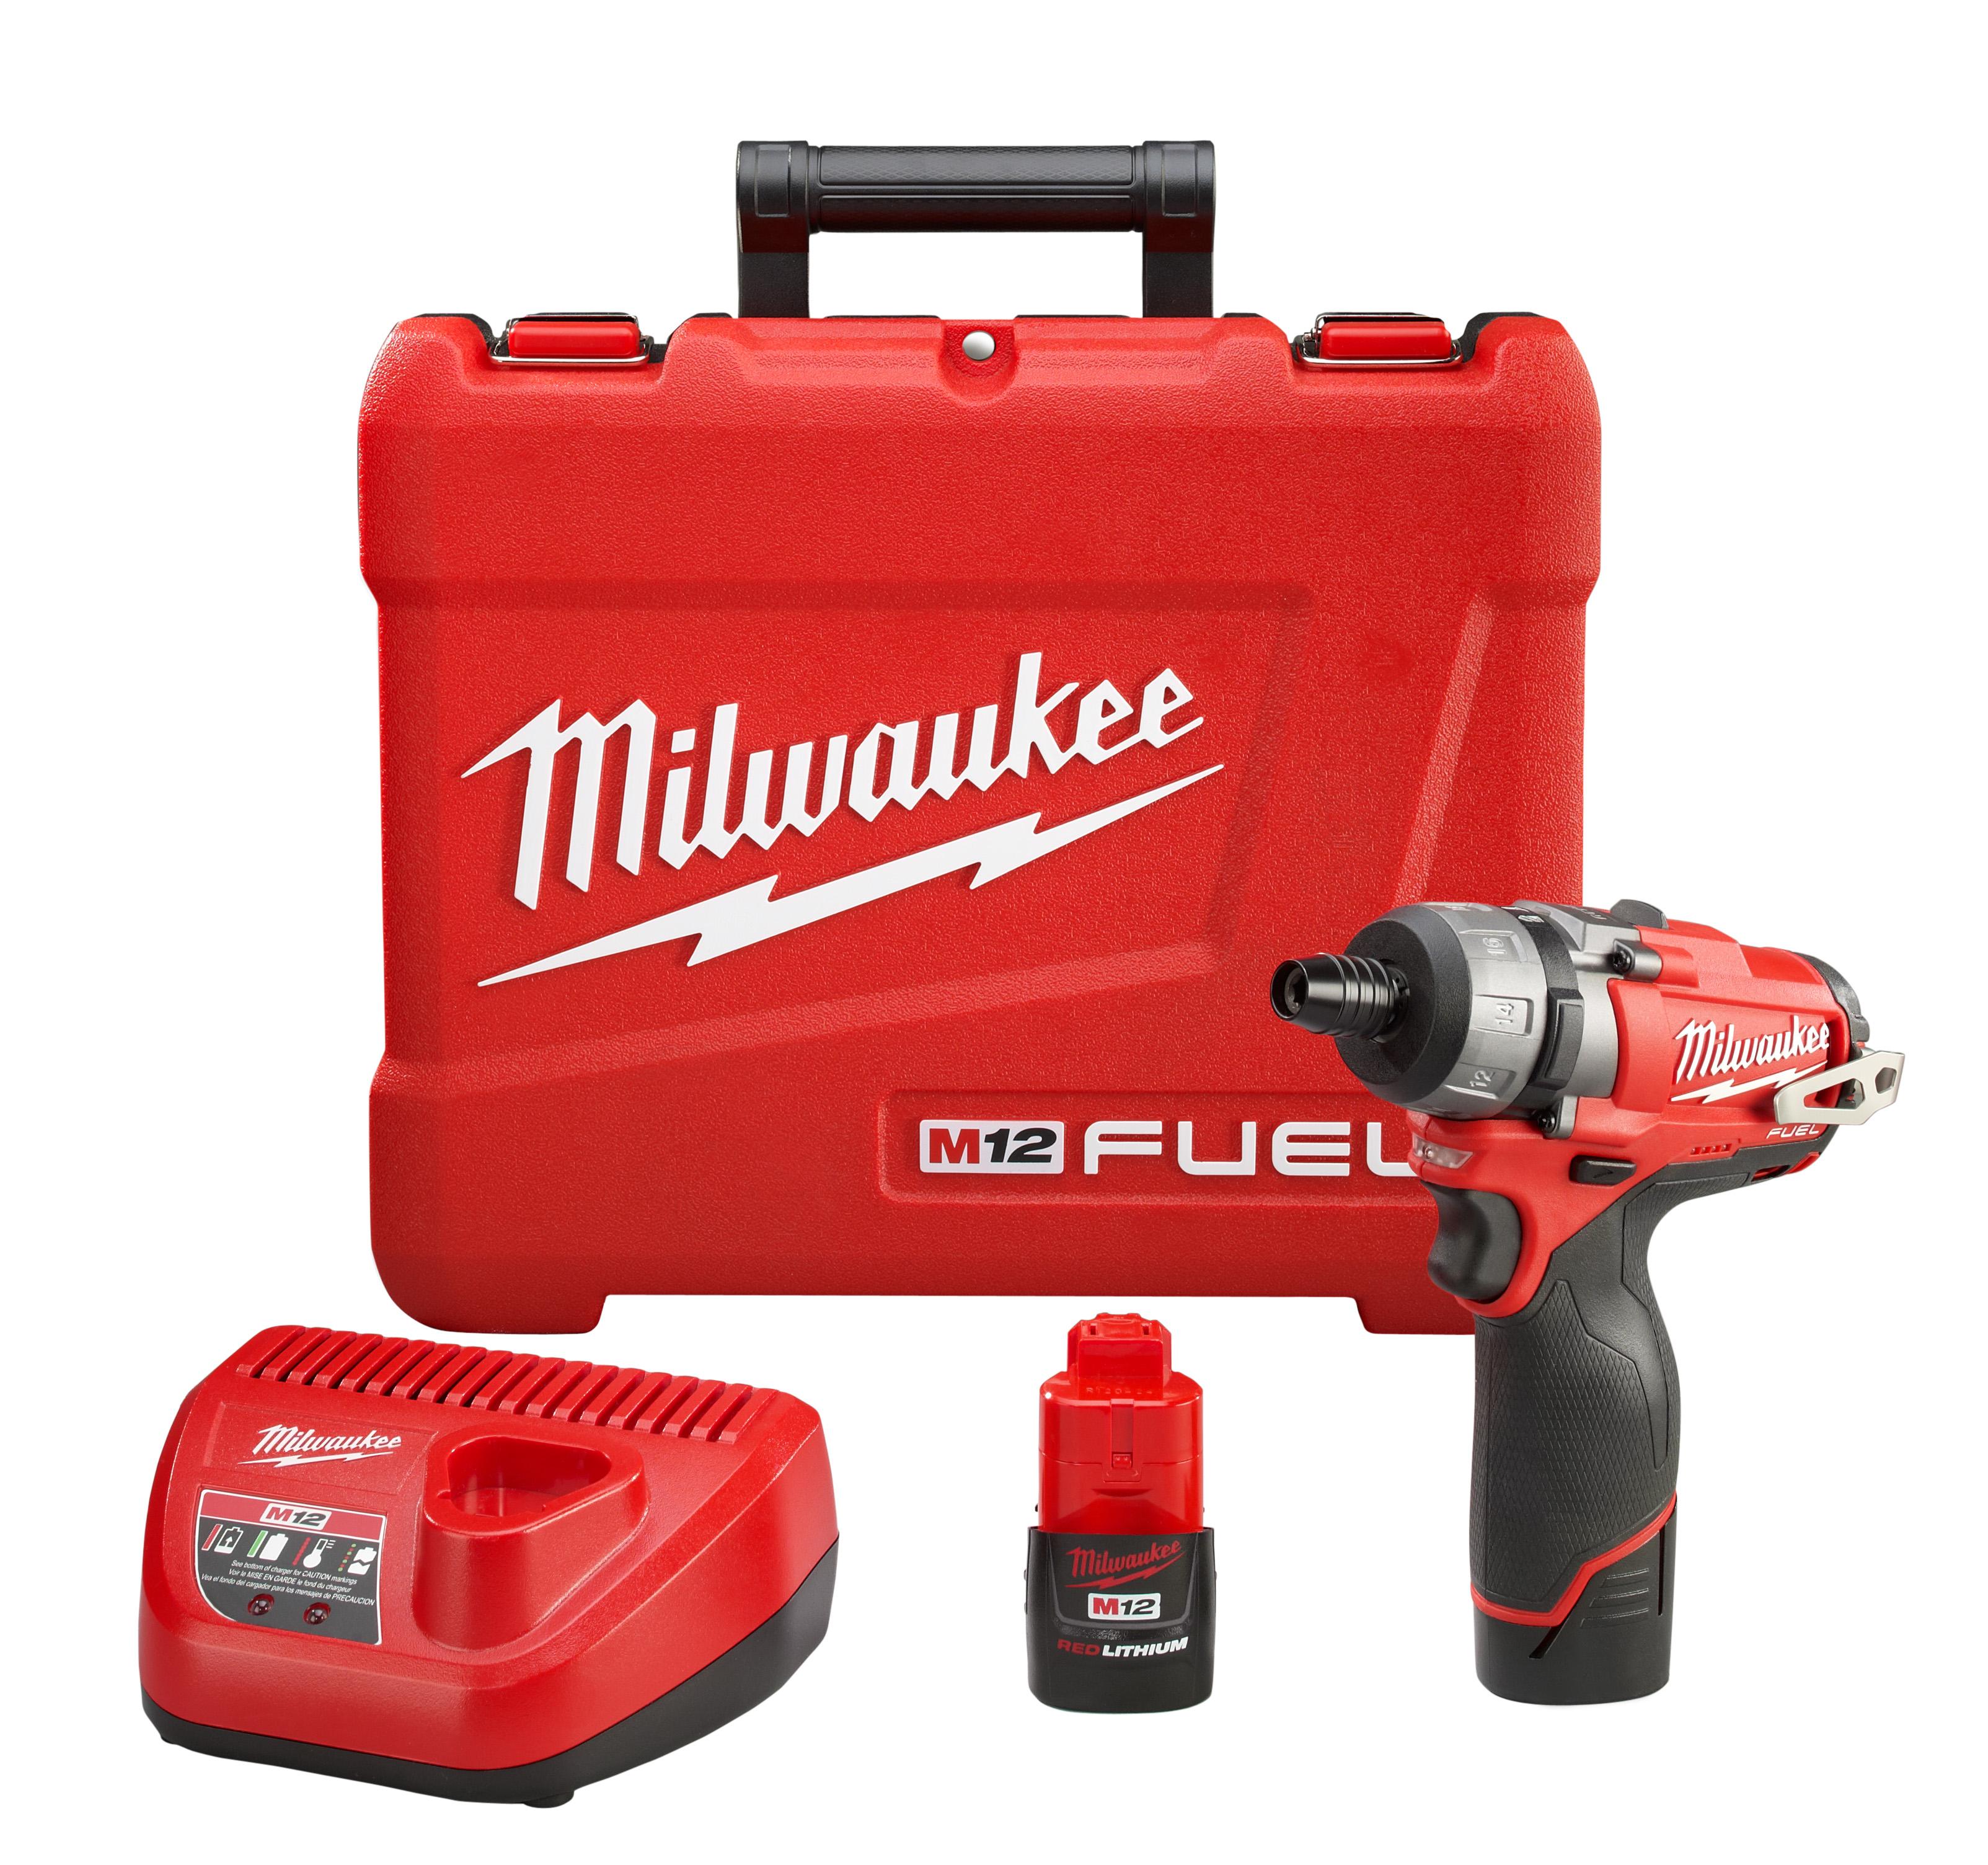 Milwaukee® M12™ FUEL™ 2402-20 Compact Cordless Screwdriver, 1/4 in Chuck, 12 VDC, 325 in-lb Torque, Lithium-Ion Battery